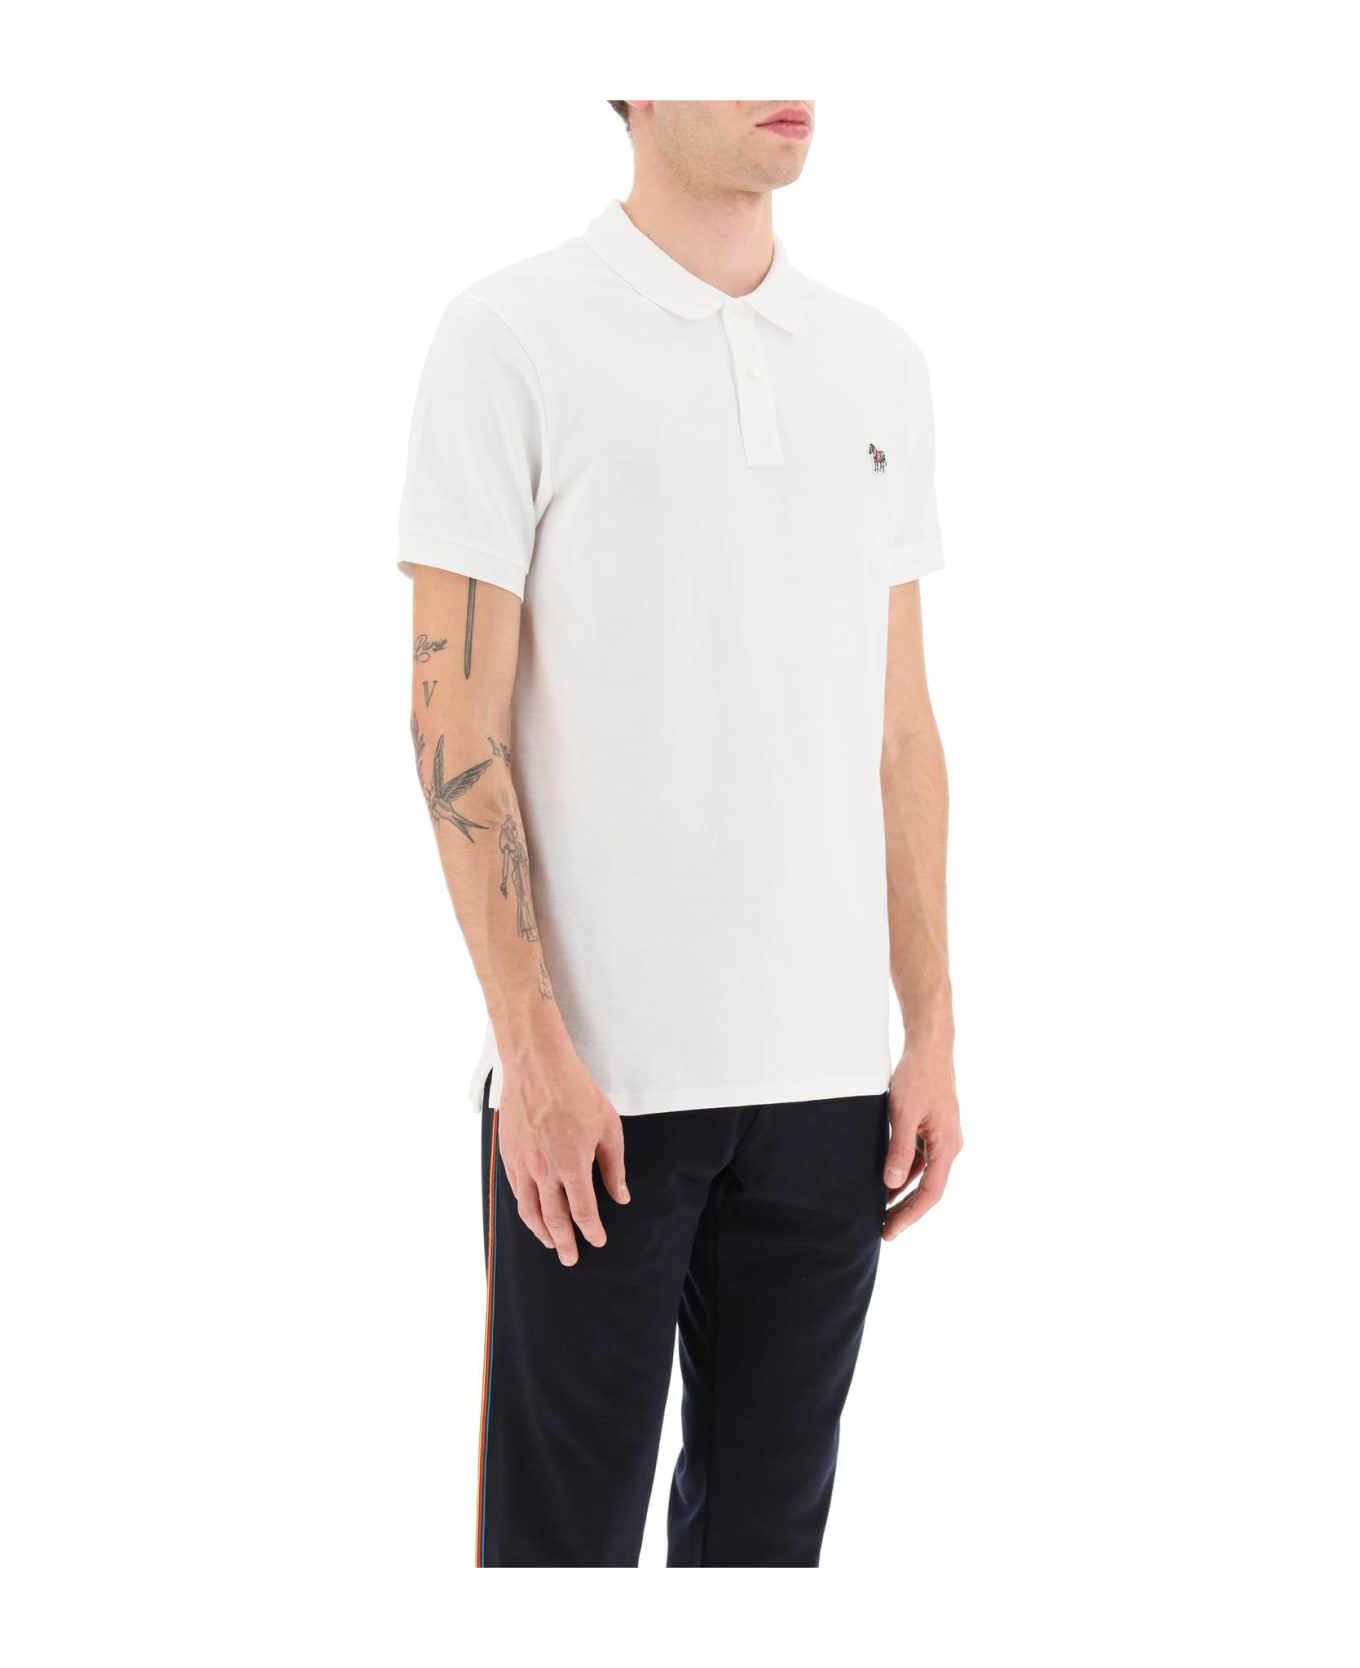 PS by Paul Smith Polo Shirt - WHITE (White)